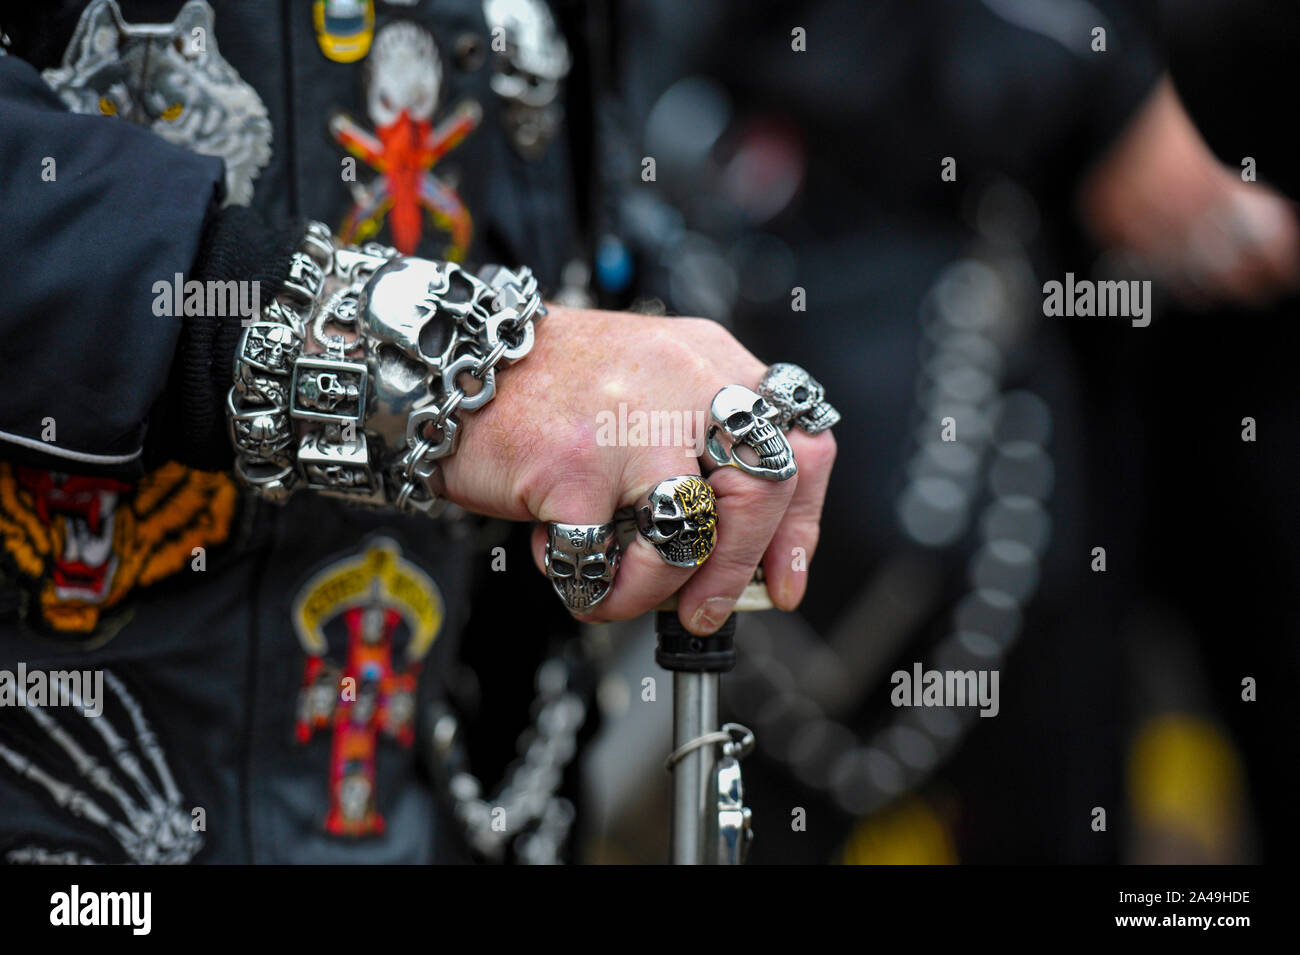 Brighton, UK. 13 October 2019 - Hundreds of bikers at the annual Brightona motorcycle event which helps raise money for the Sussex Hearts Charity. Brightona started at Brighton Marina in 2004 and is one of the biggest charity motorcycle events in England with bikers from all over the country taking part .Credit : Simon Dack / Alamy Live News Stock Photo